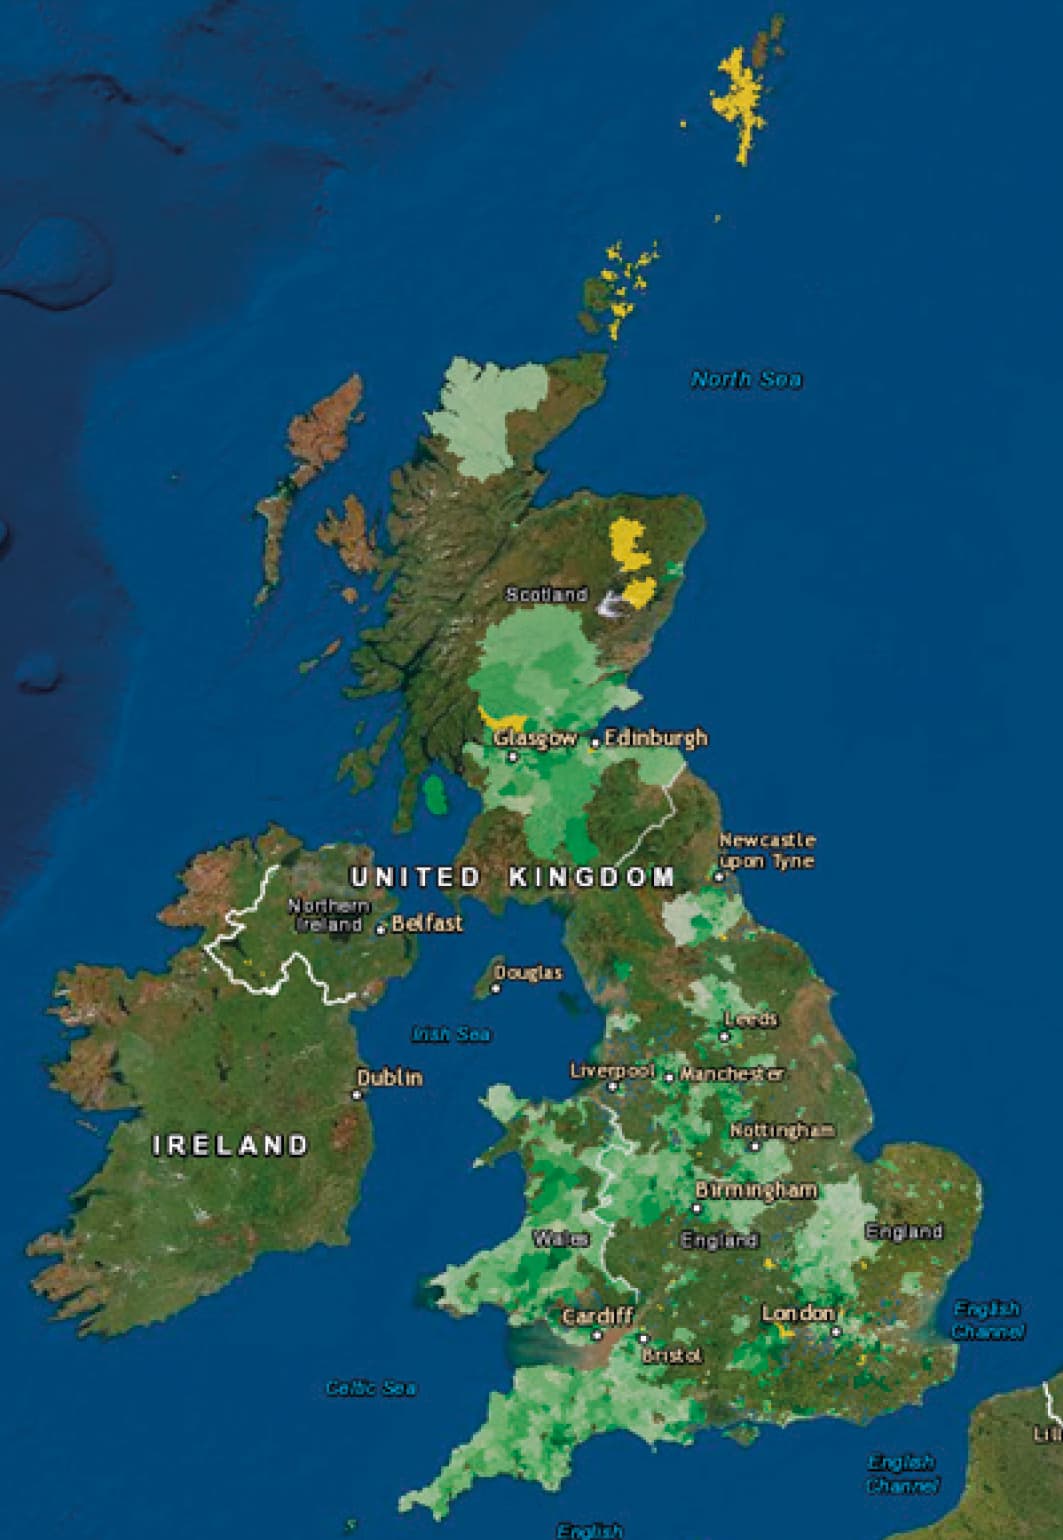 The UK Canopy Cover Webmap